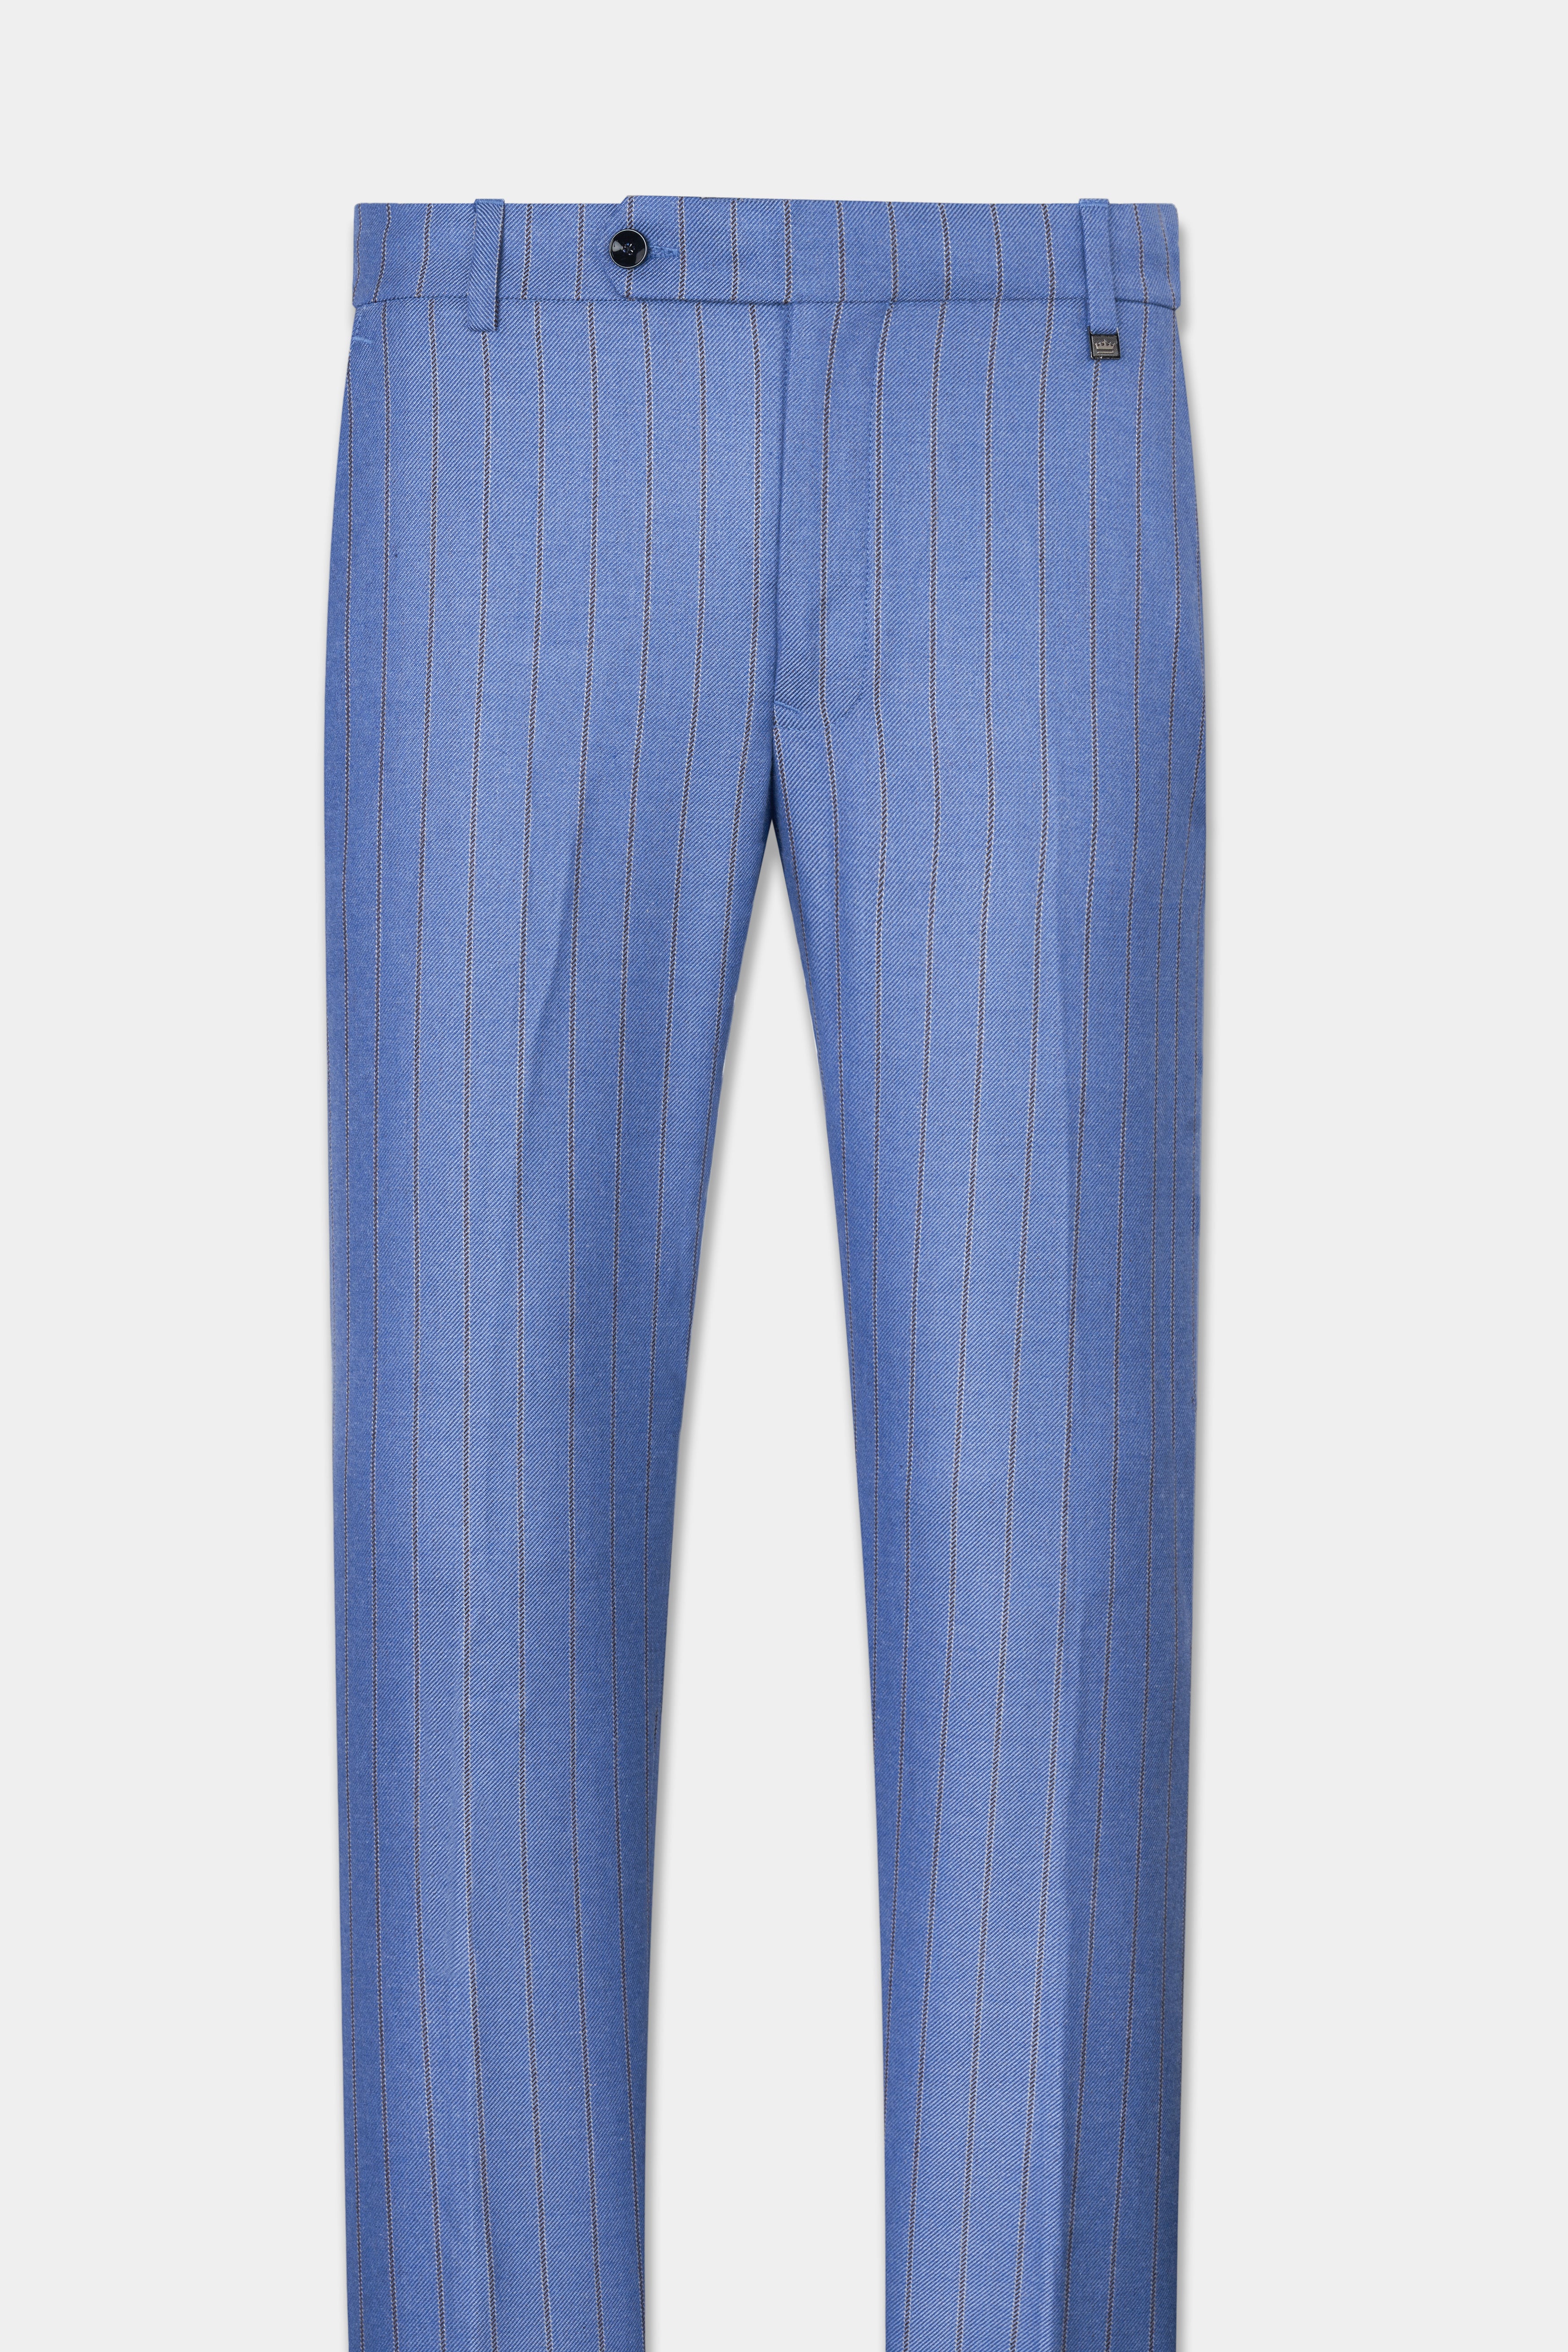 Chetwode Blue and Iroko Brown Striped Wool Rich Pant T2769-28, T2769-30, T2769-32, T2769-34, T2769-36, T2769-38, T2769-40, T2769-42, T2769-44